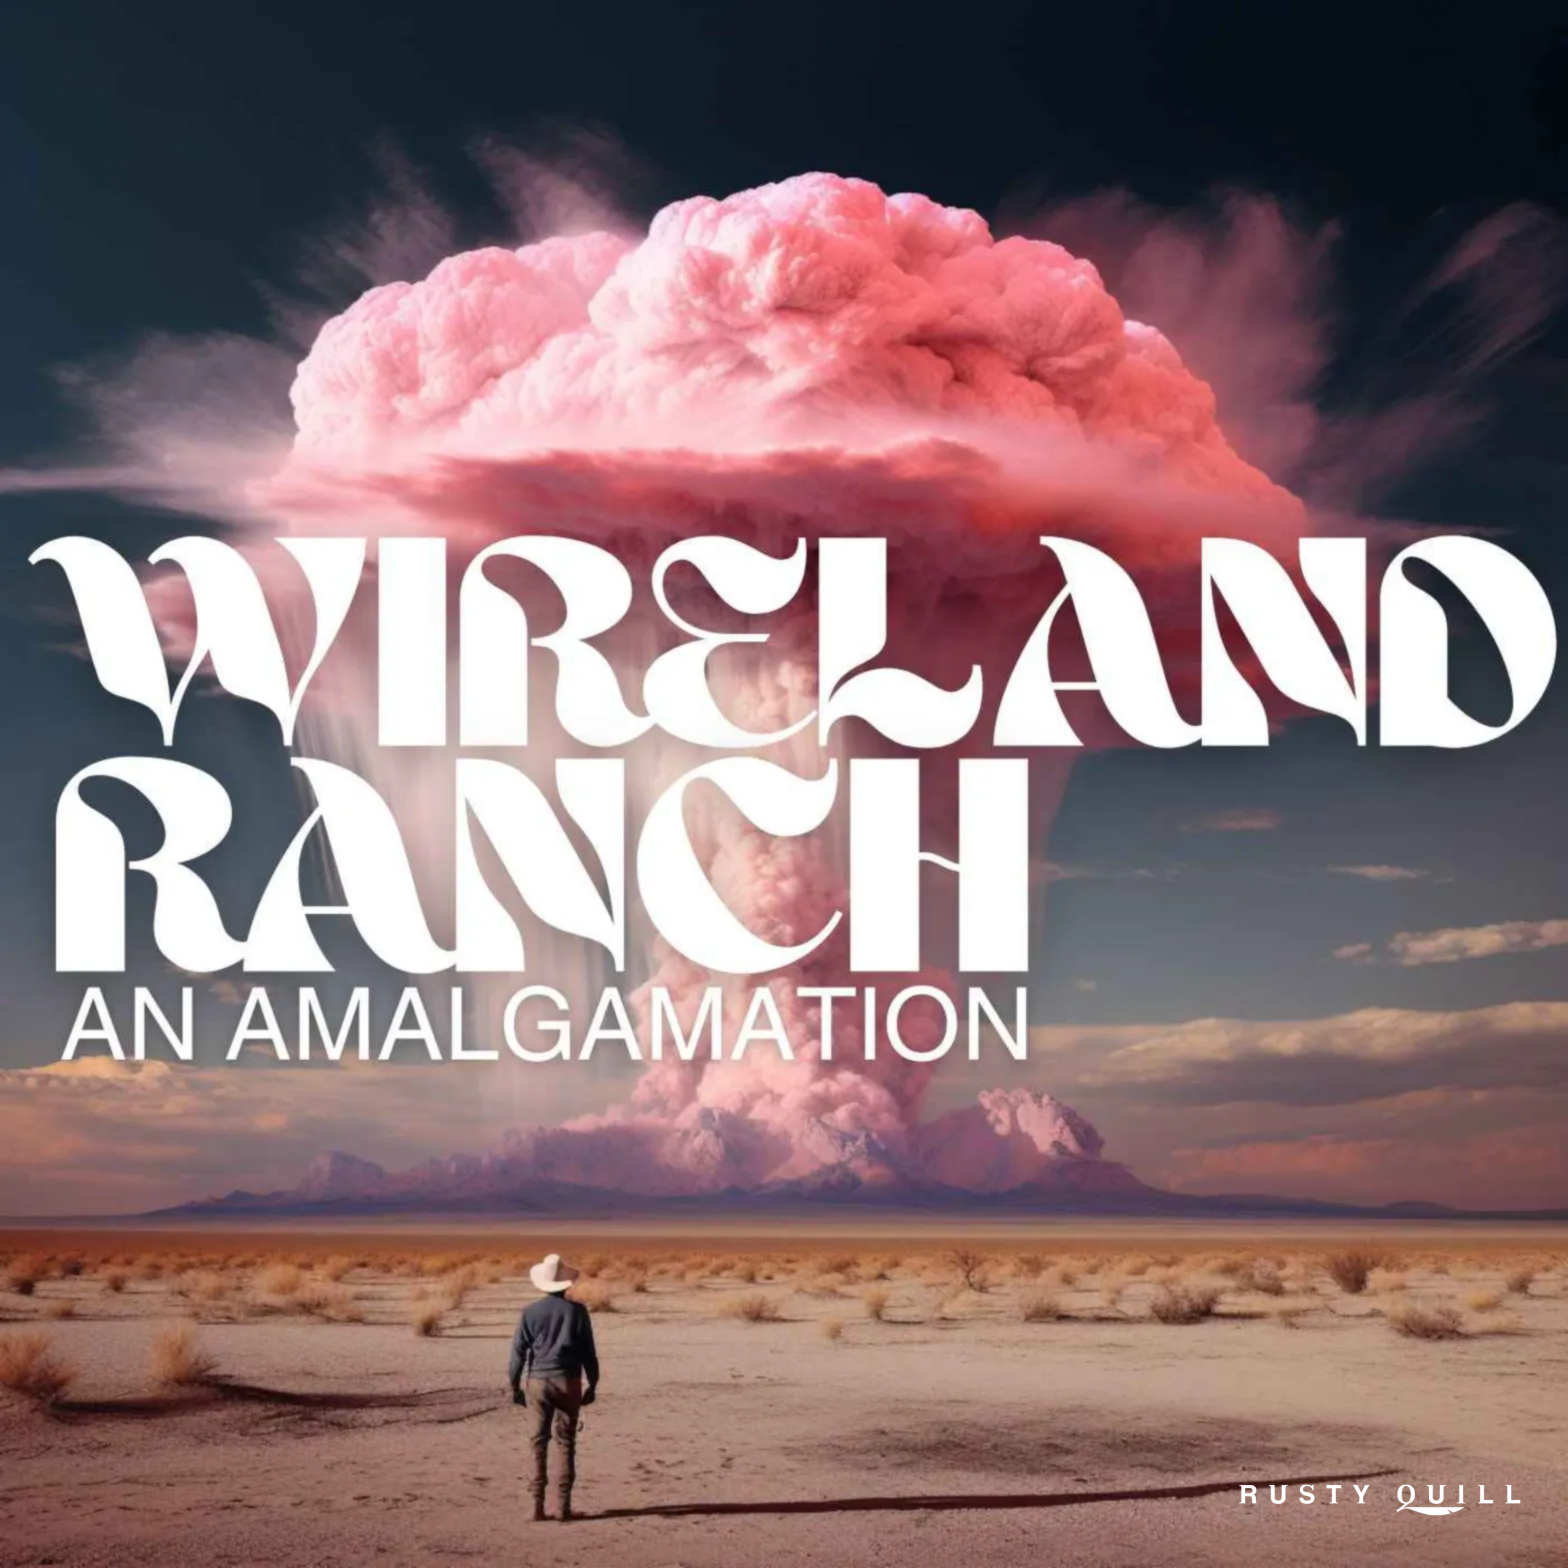 The showcard for Wireland Ranch. A man stands in the foreground, looking out at a mountain on the horizon, over which a massive pink mushroom cloud is blotting out the sky.